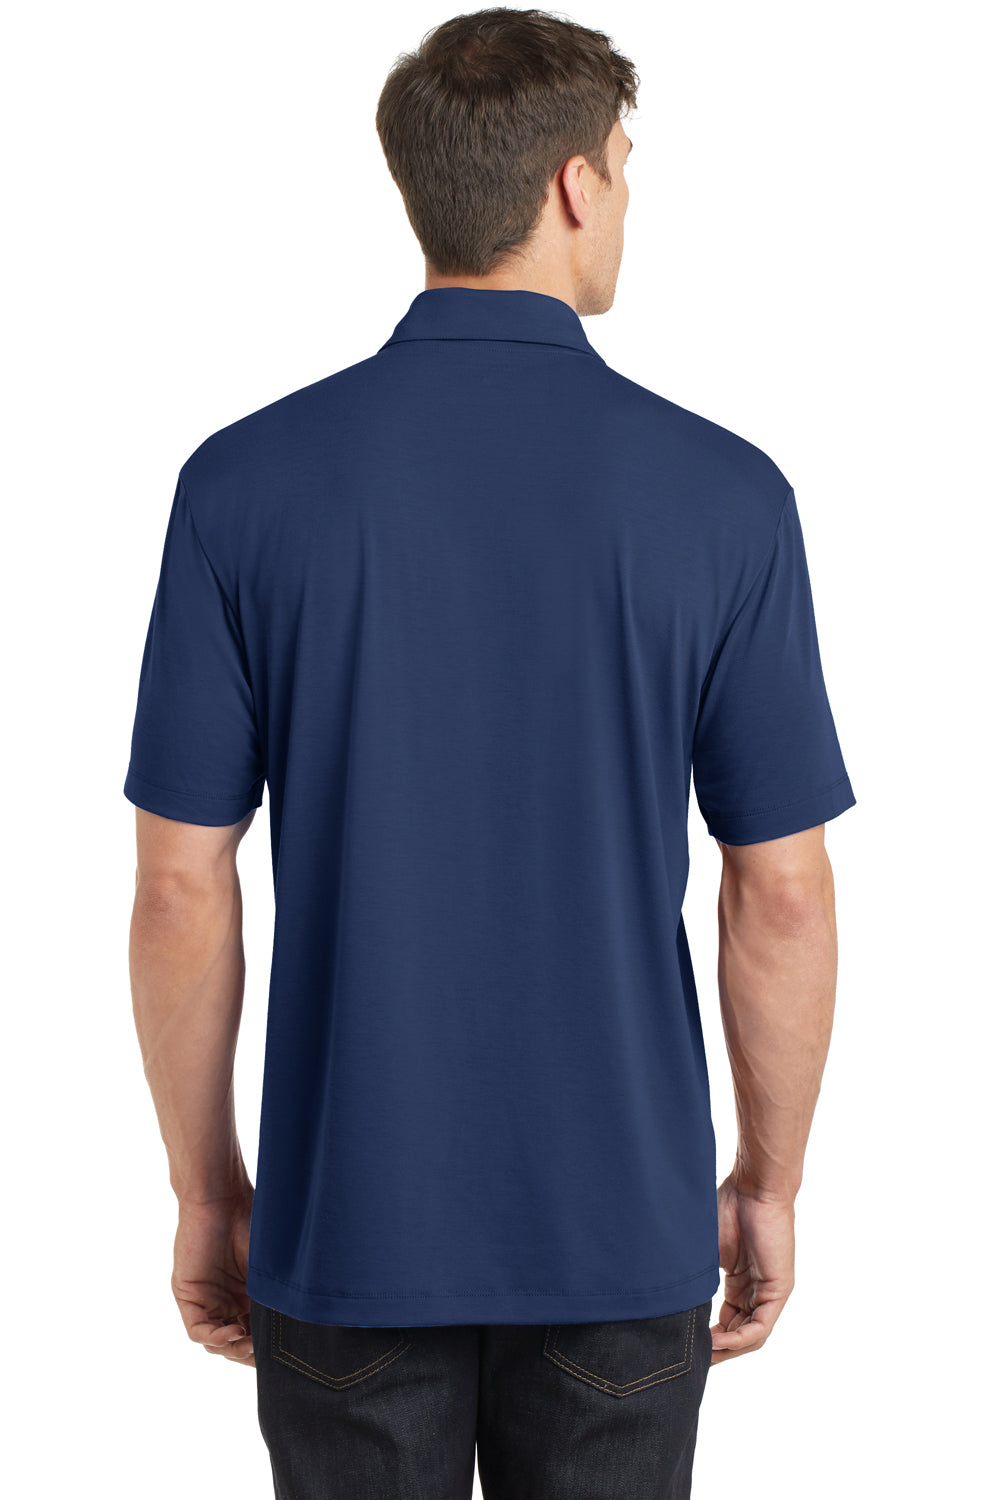 Port Authority K568 Mens Cotton Touch Performance Moisture Wicking Short Sleeve Polo Shirt Estate Blue Back